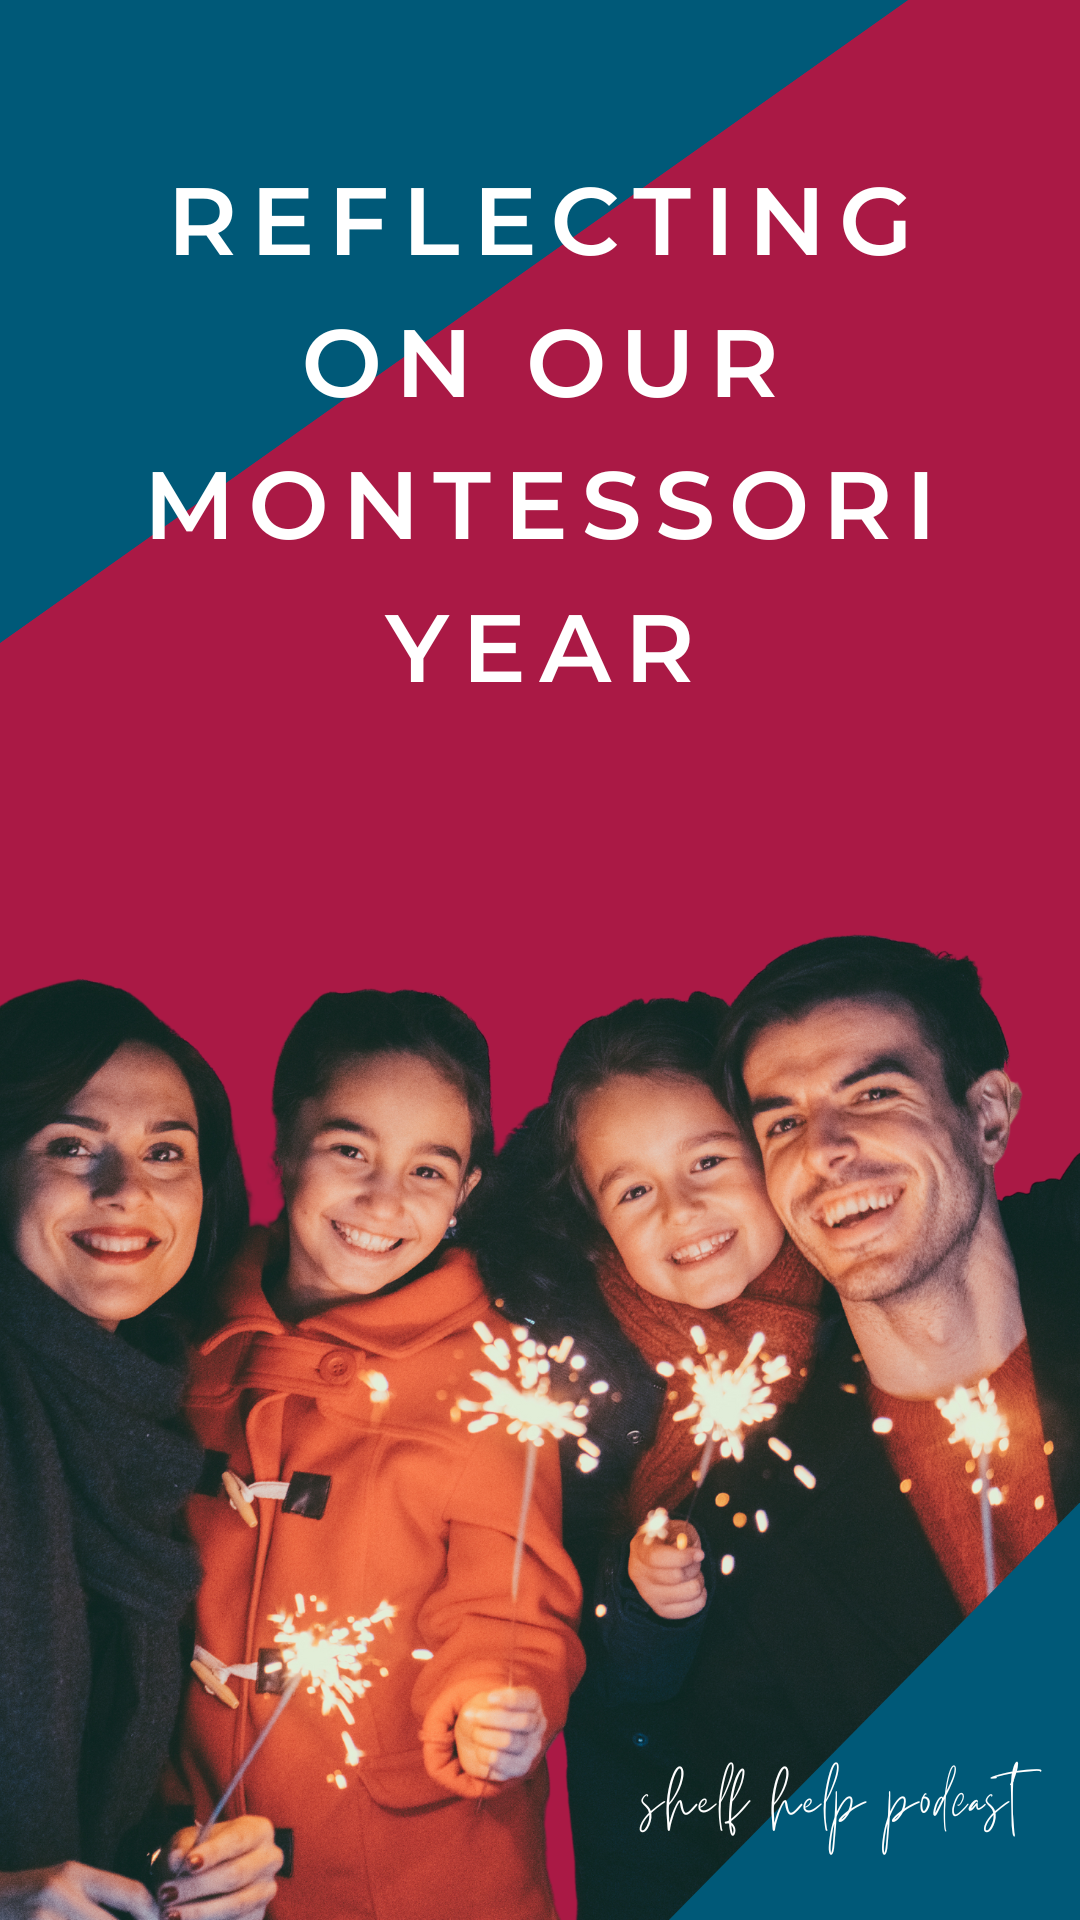 In this Montessori parenting podcast, we reflect on how Montessori has influenced our past year and how we hope to bring Montessori to life in 2023